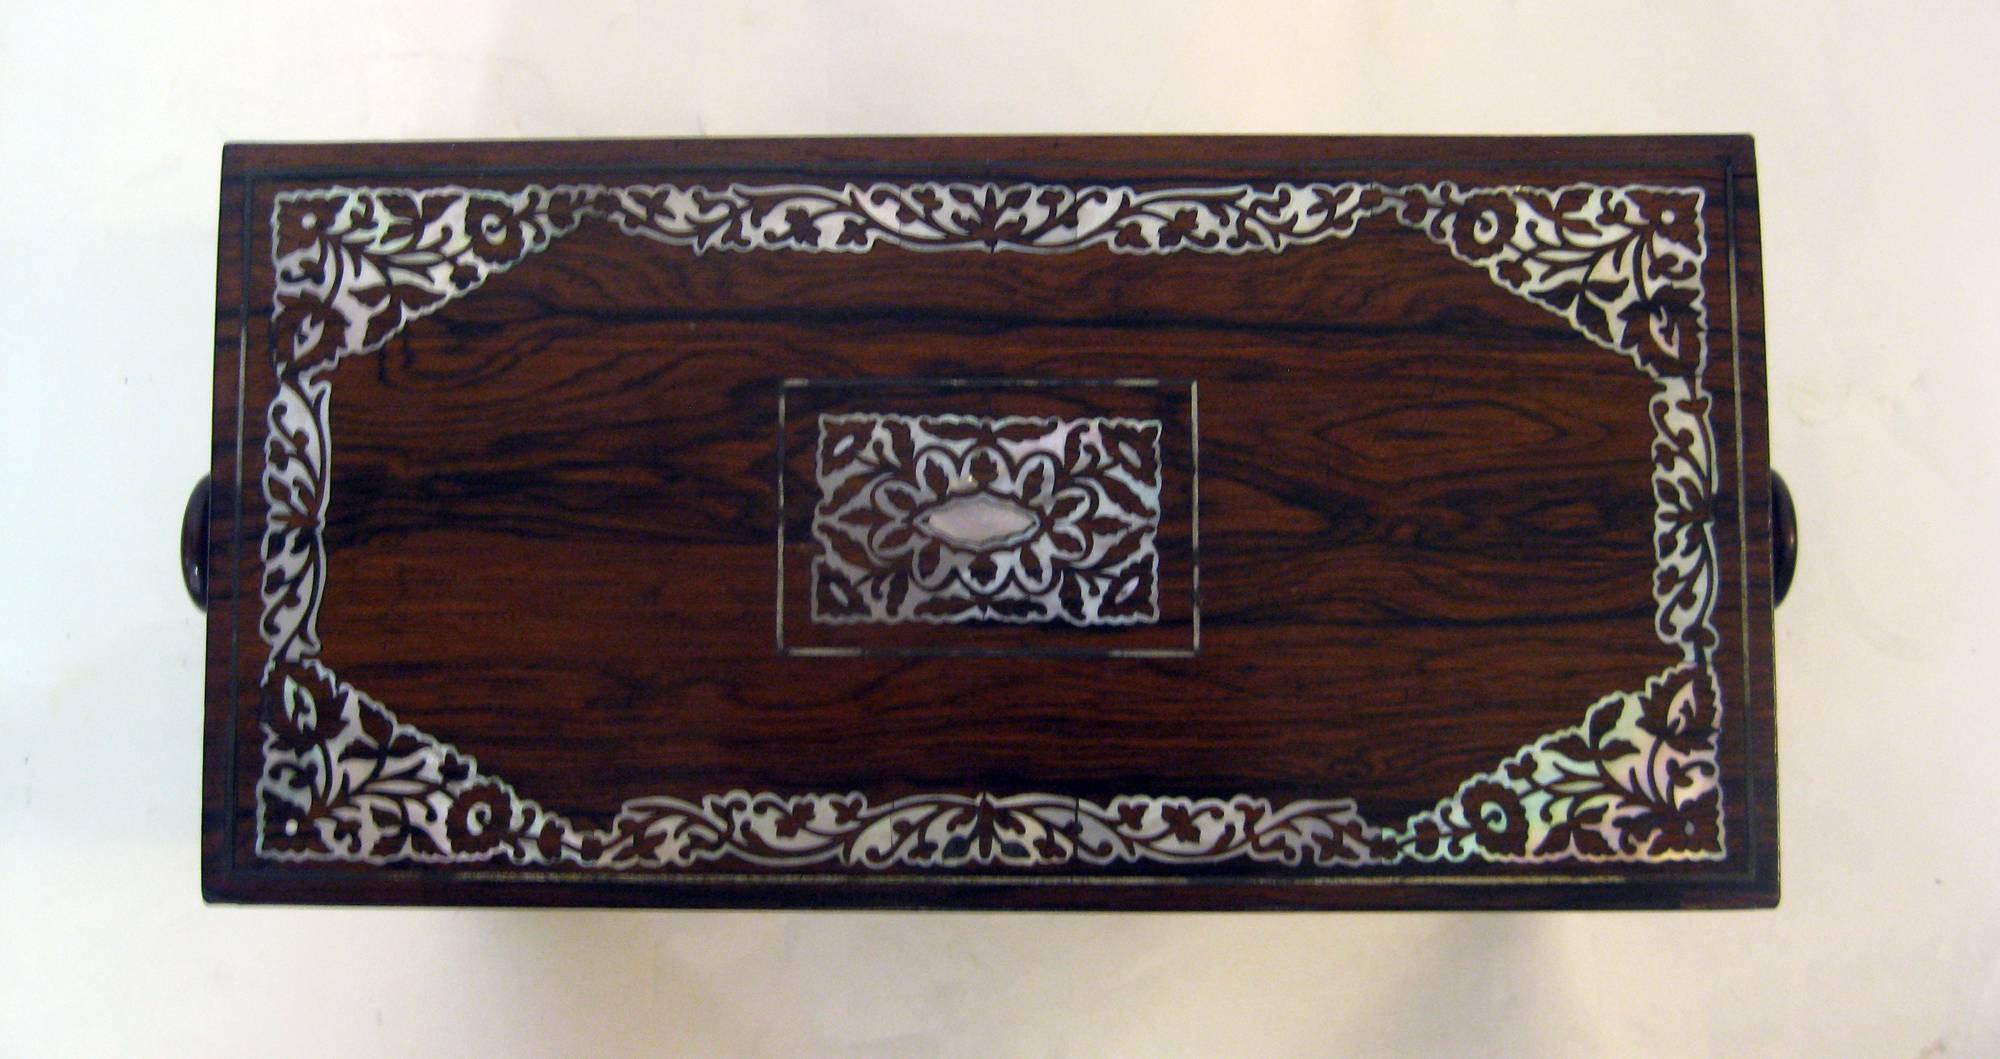 19th century English Rosewood Tea Caddy with Mother of Pearl Inlay In Good Condition For Sale In Savannah, GA